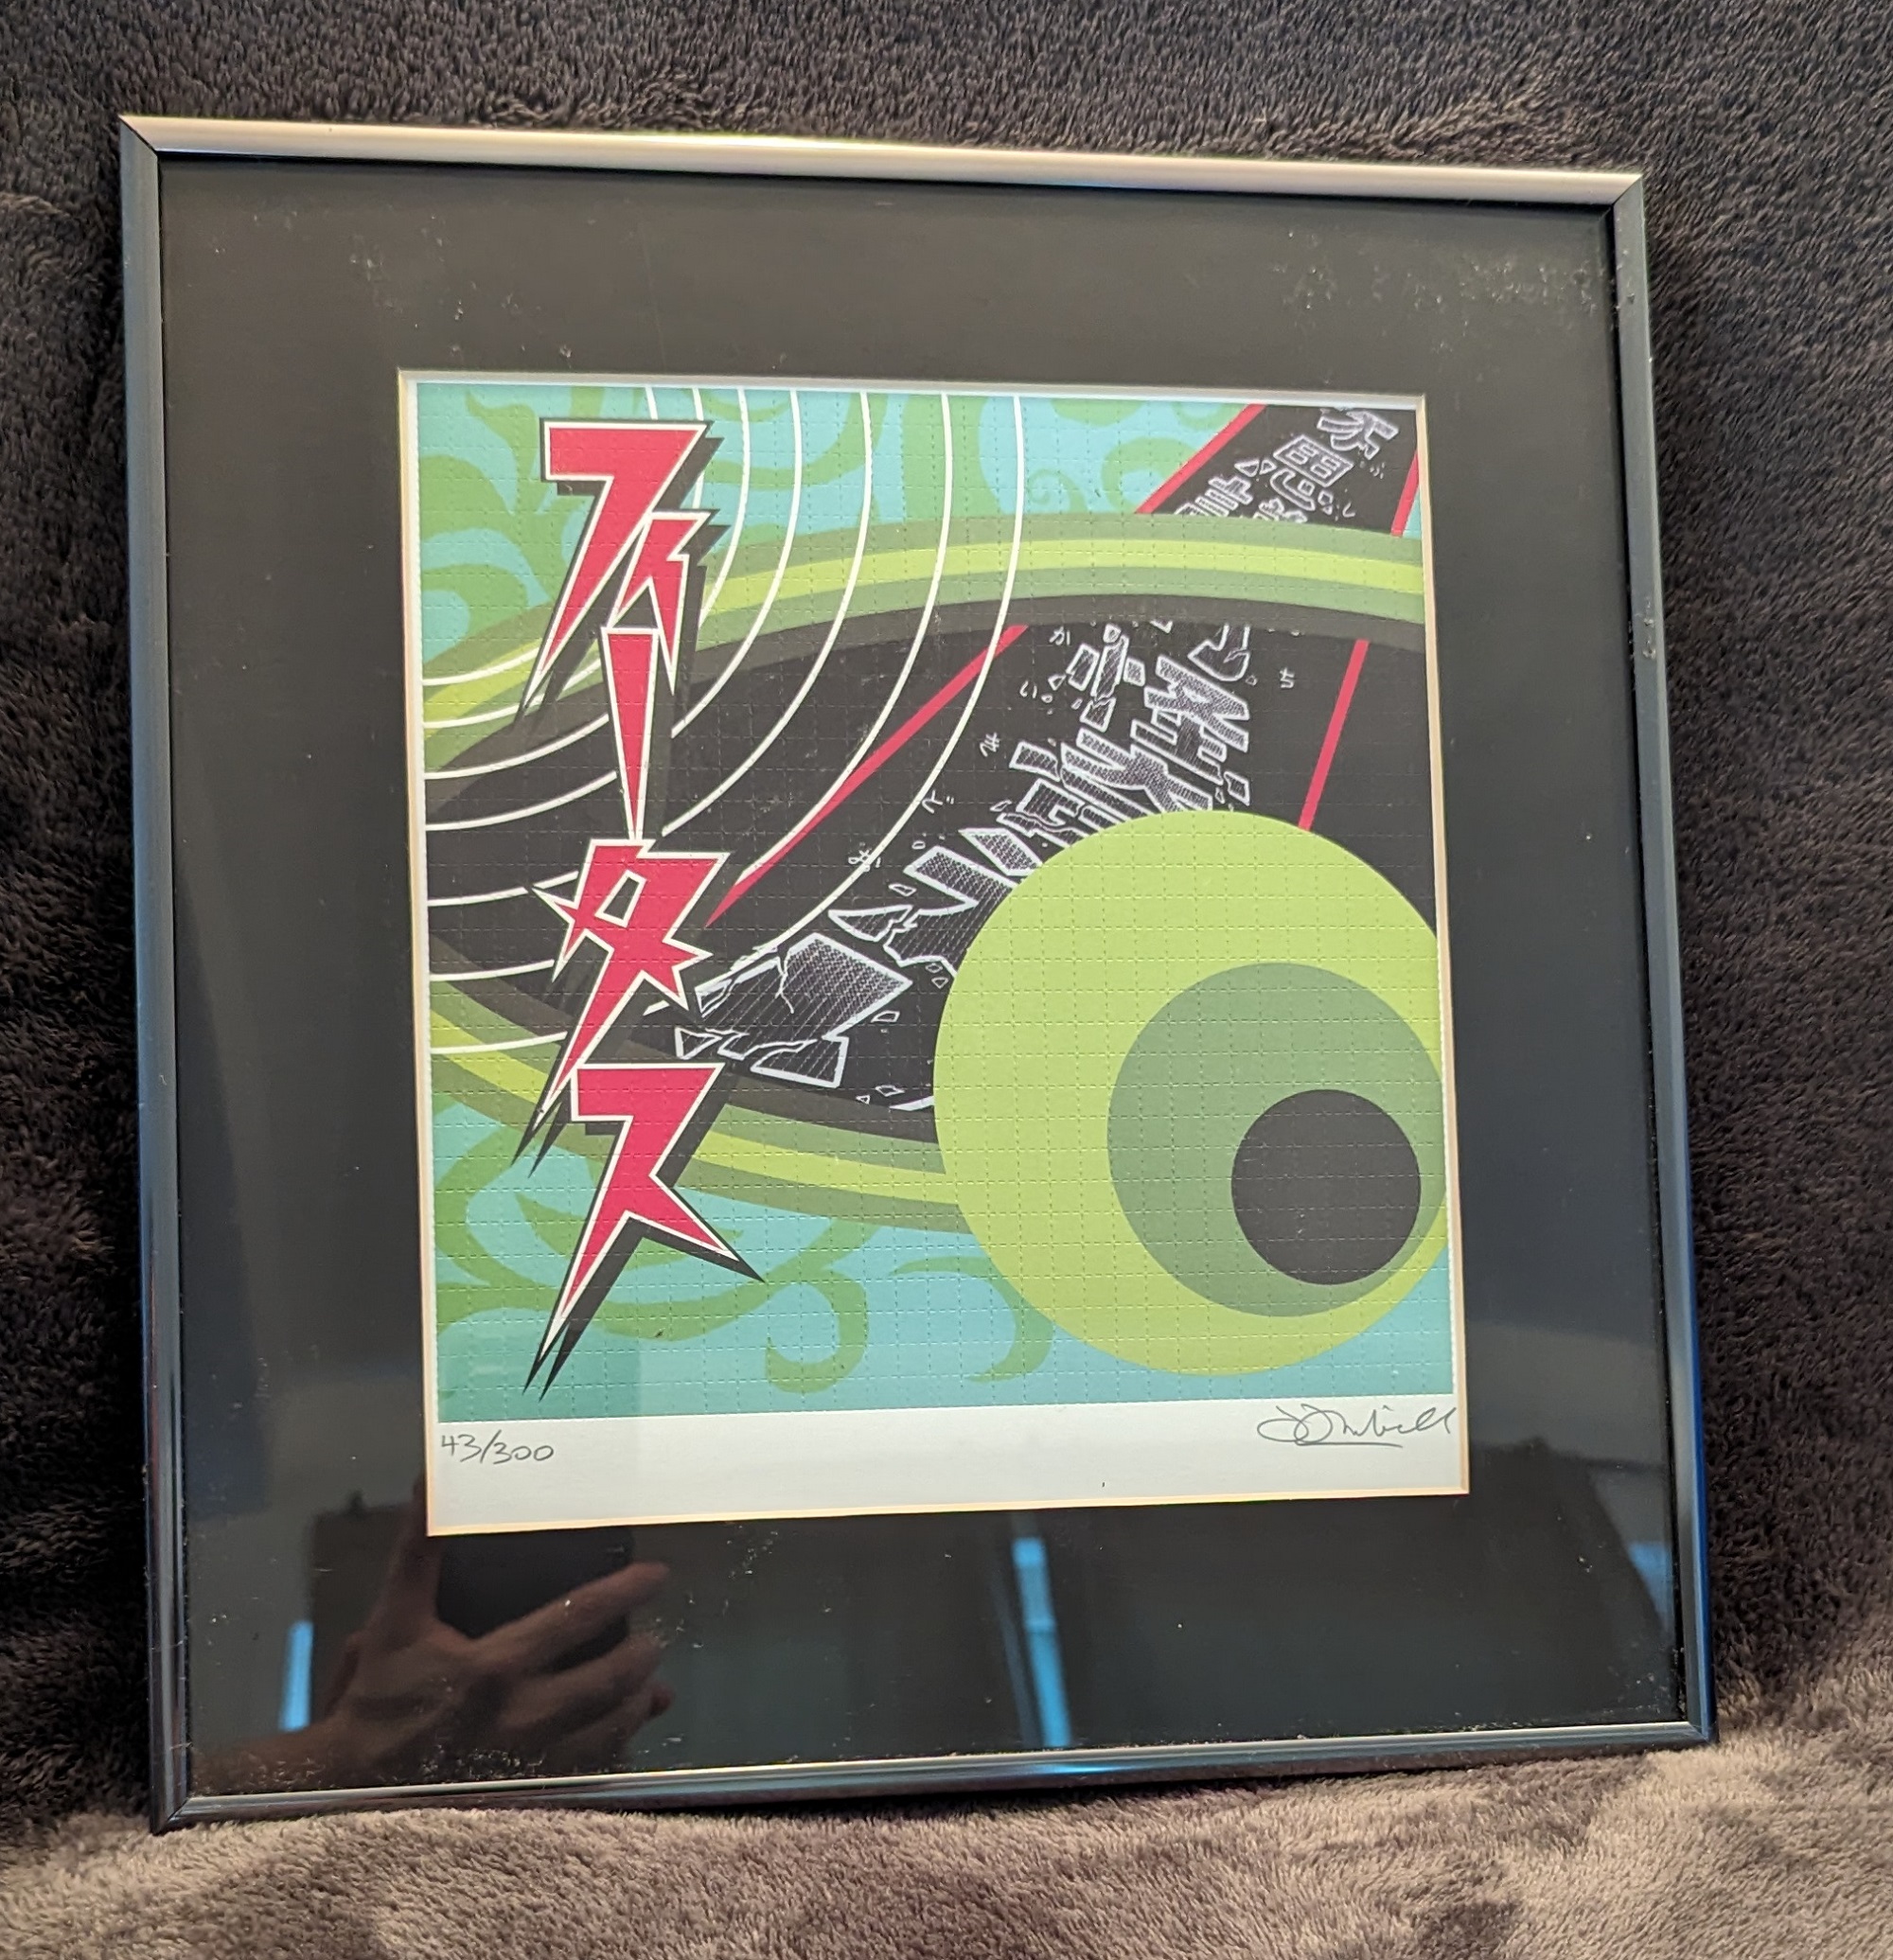 Just an example of how amazing the LSD blotter art looks when it's framed. This one is signed pr as well